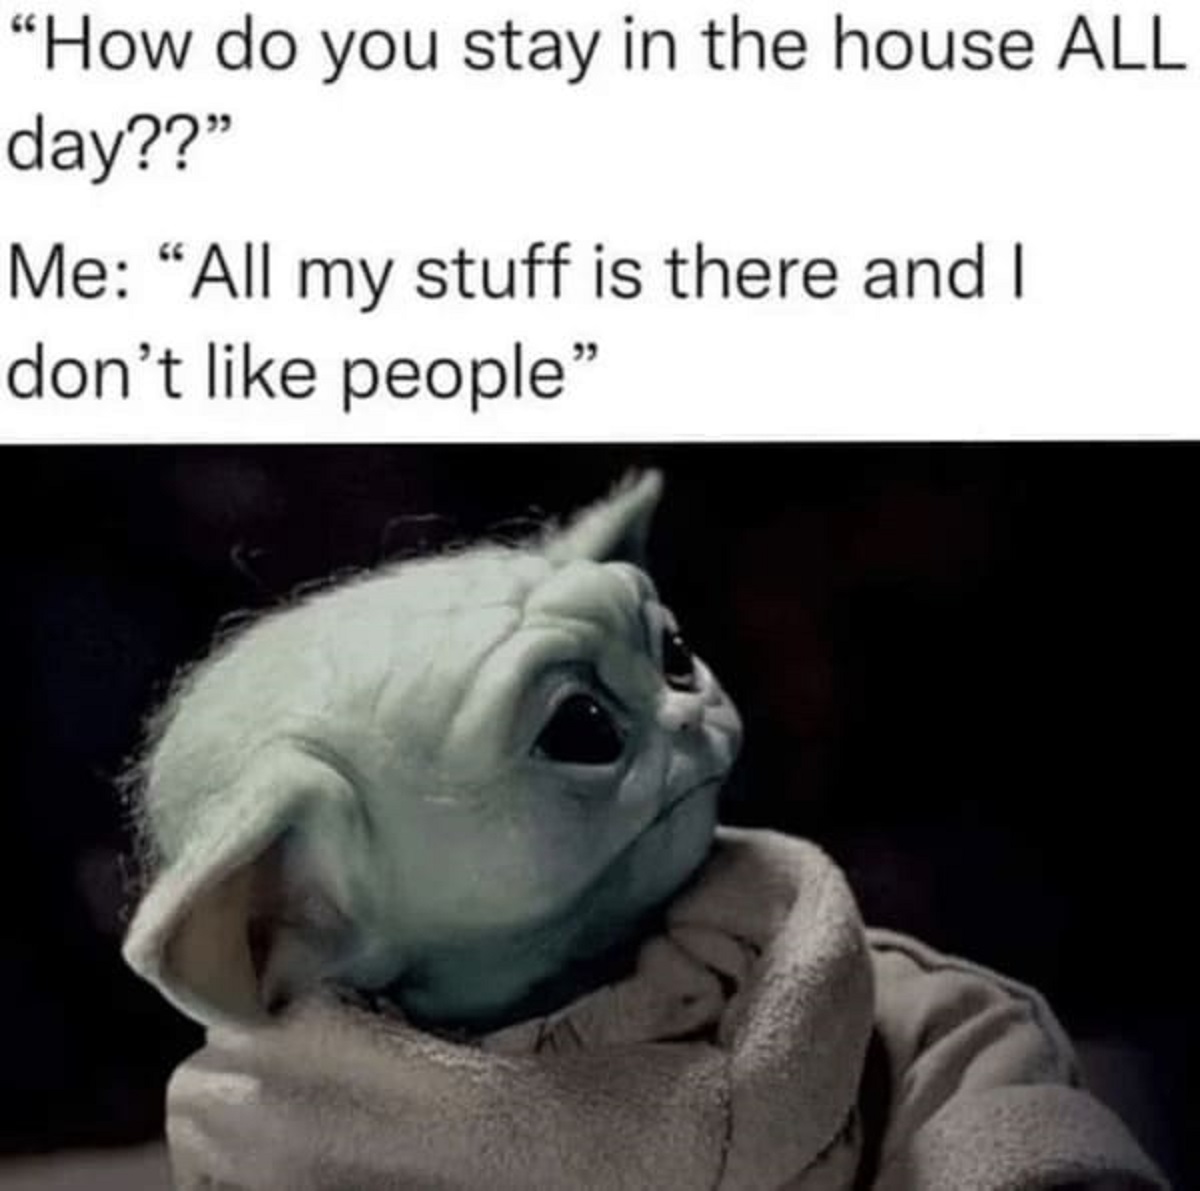 don t like people meme - "How do you stay in the house All day??" Me "All my stuff is there and I don't people"